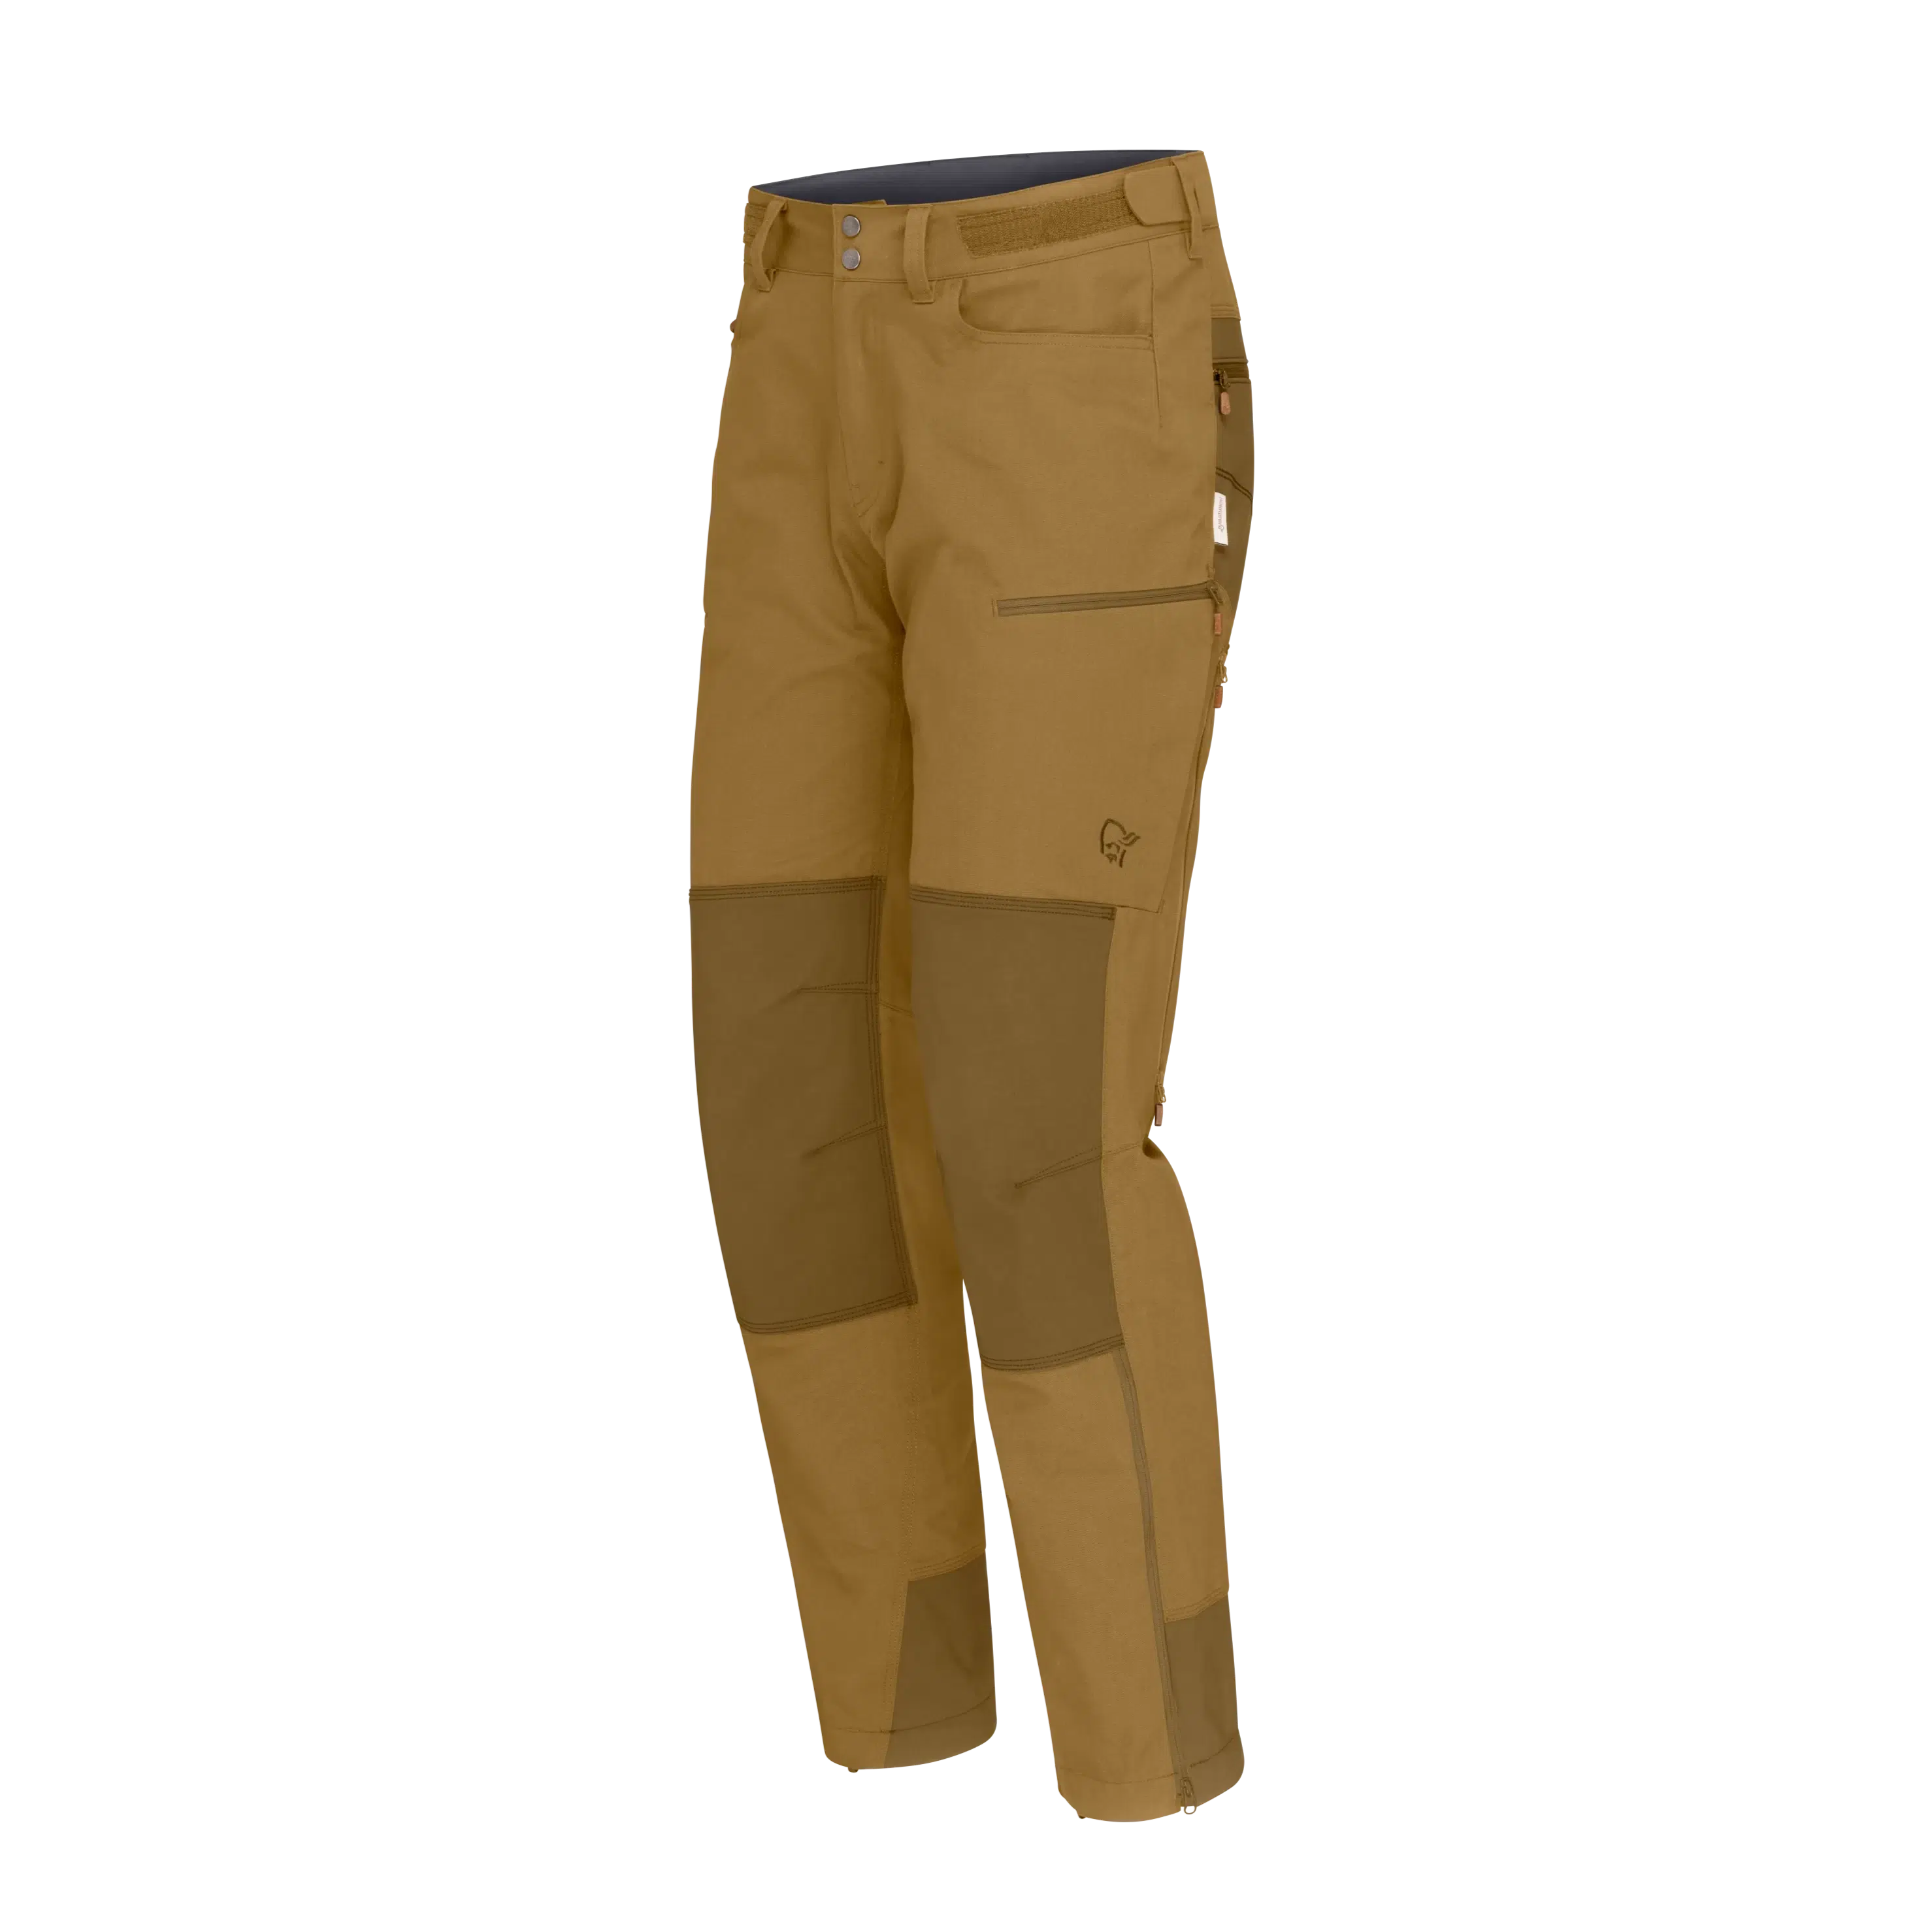 Women's Safari Pants 100% Cotton Pockets at the Knees and Front